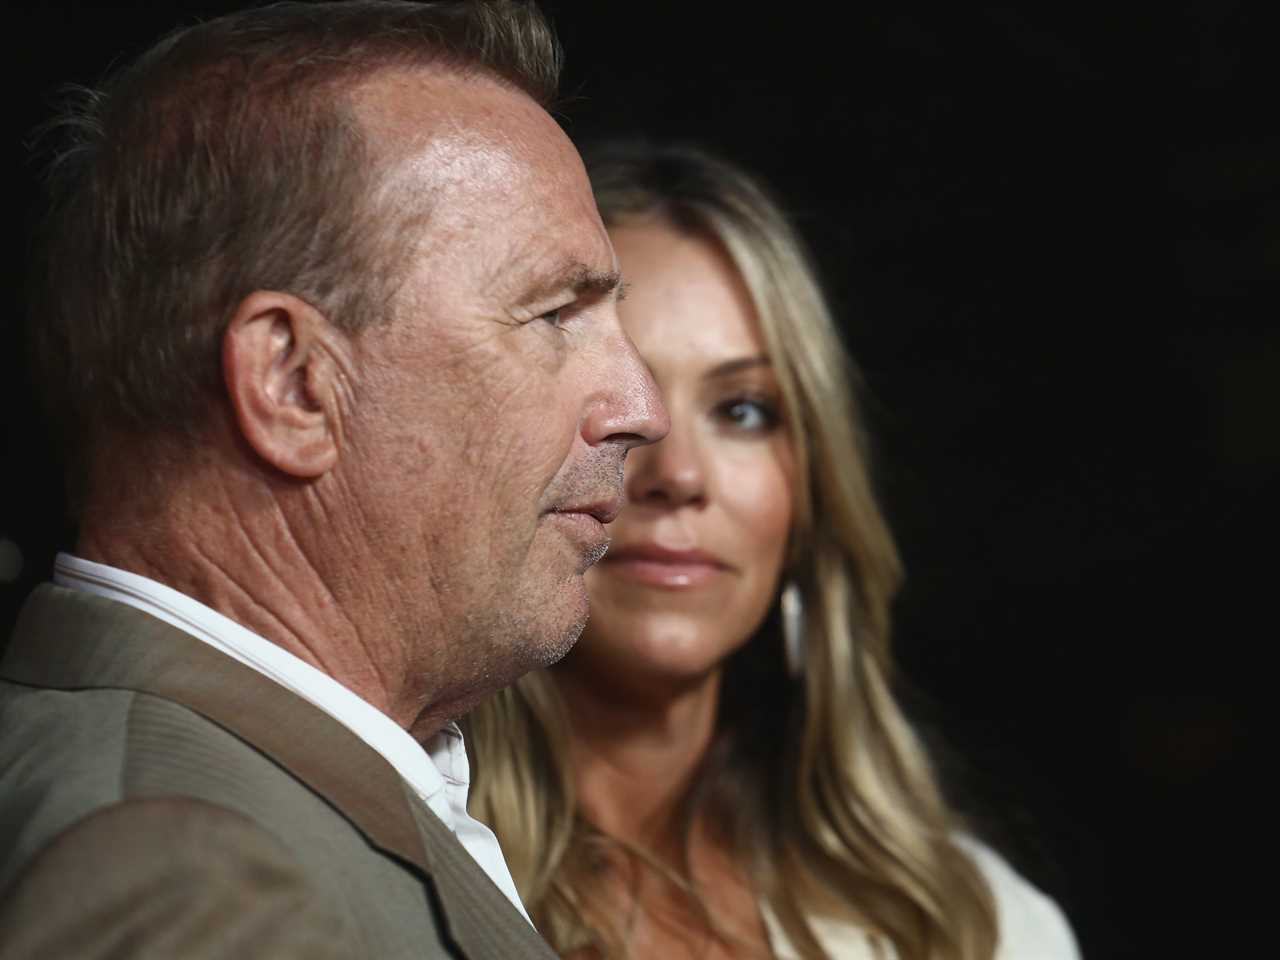 Kevin Costner and Christine Baumgartner attend the Premiere Party For Paramount Network's "Yellowstone" Season 2 at Lombardi House on May 30, 2019 in Los Angeles, California